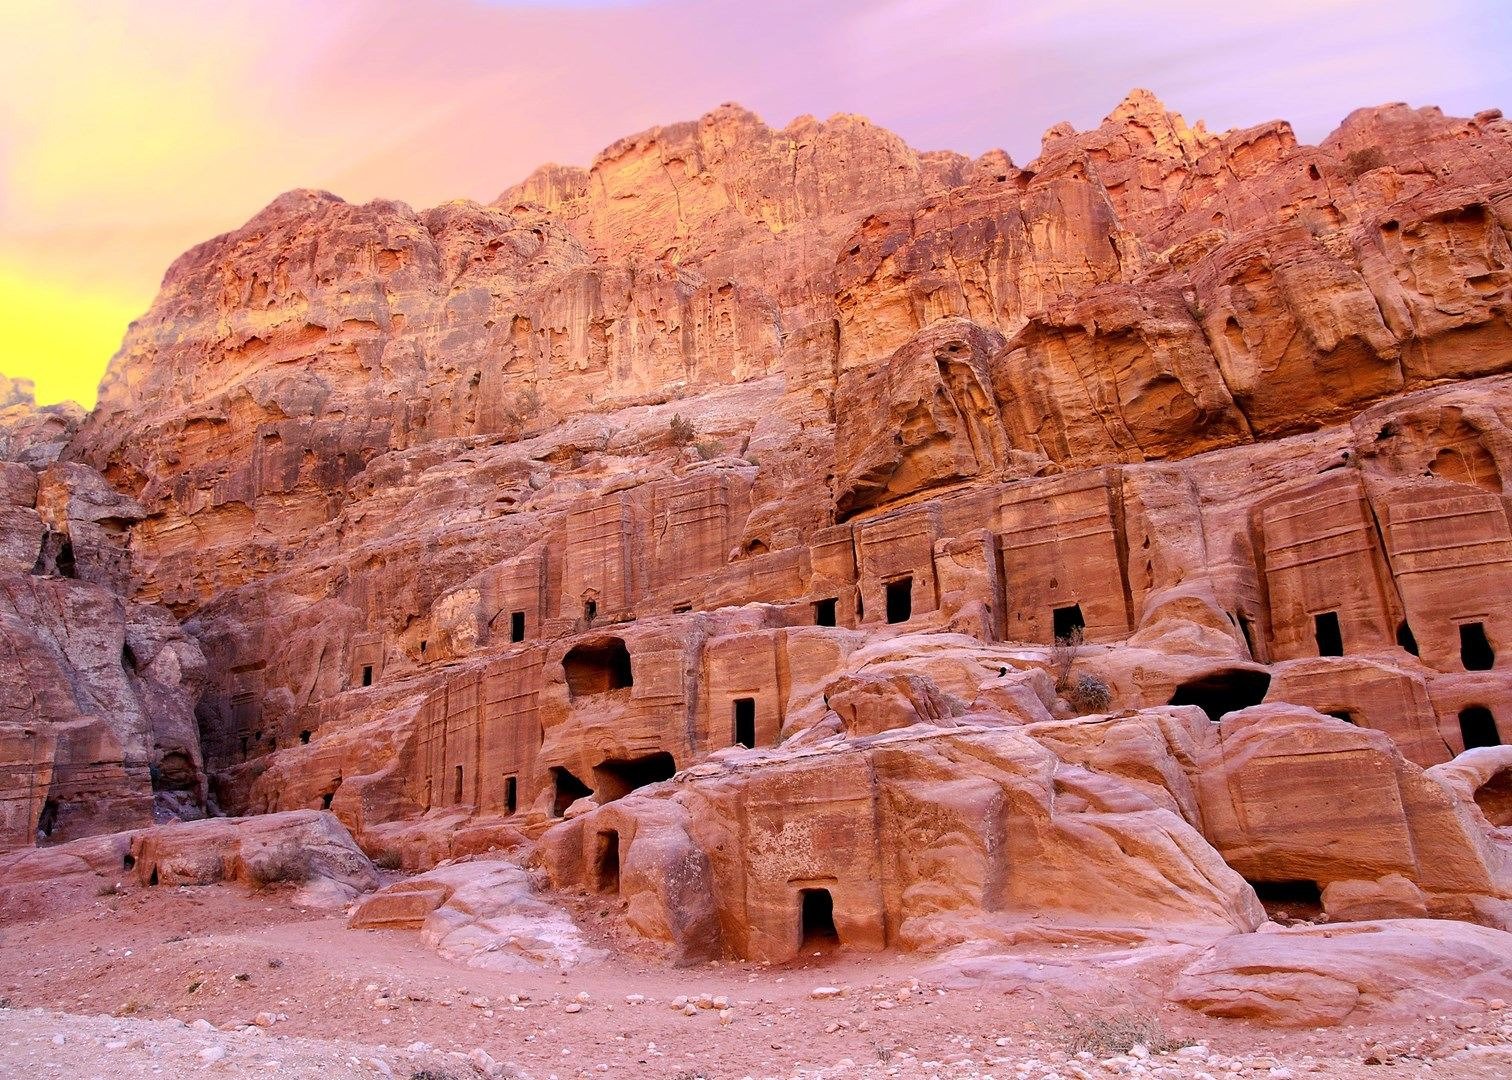 Sometimes Petra is called ‘Rose City’due to Rose-Red colored sandstone hills.